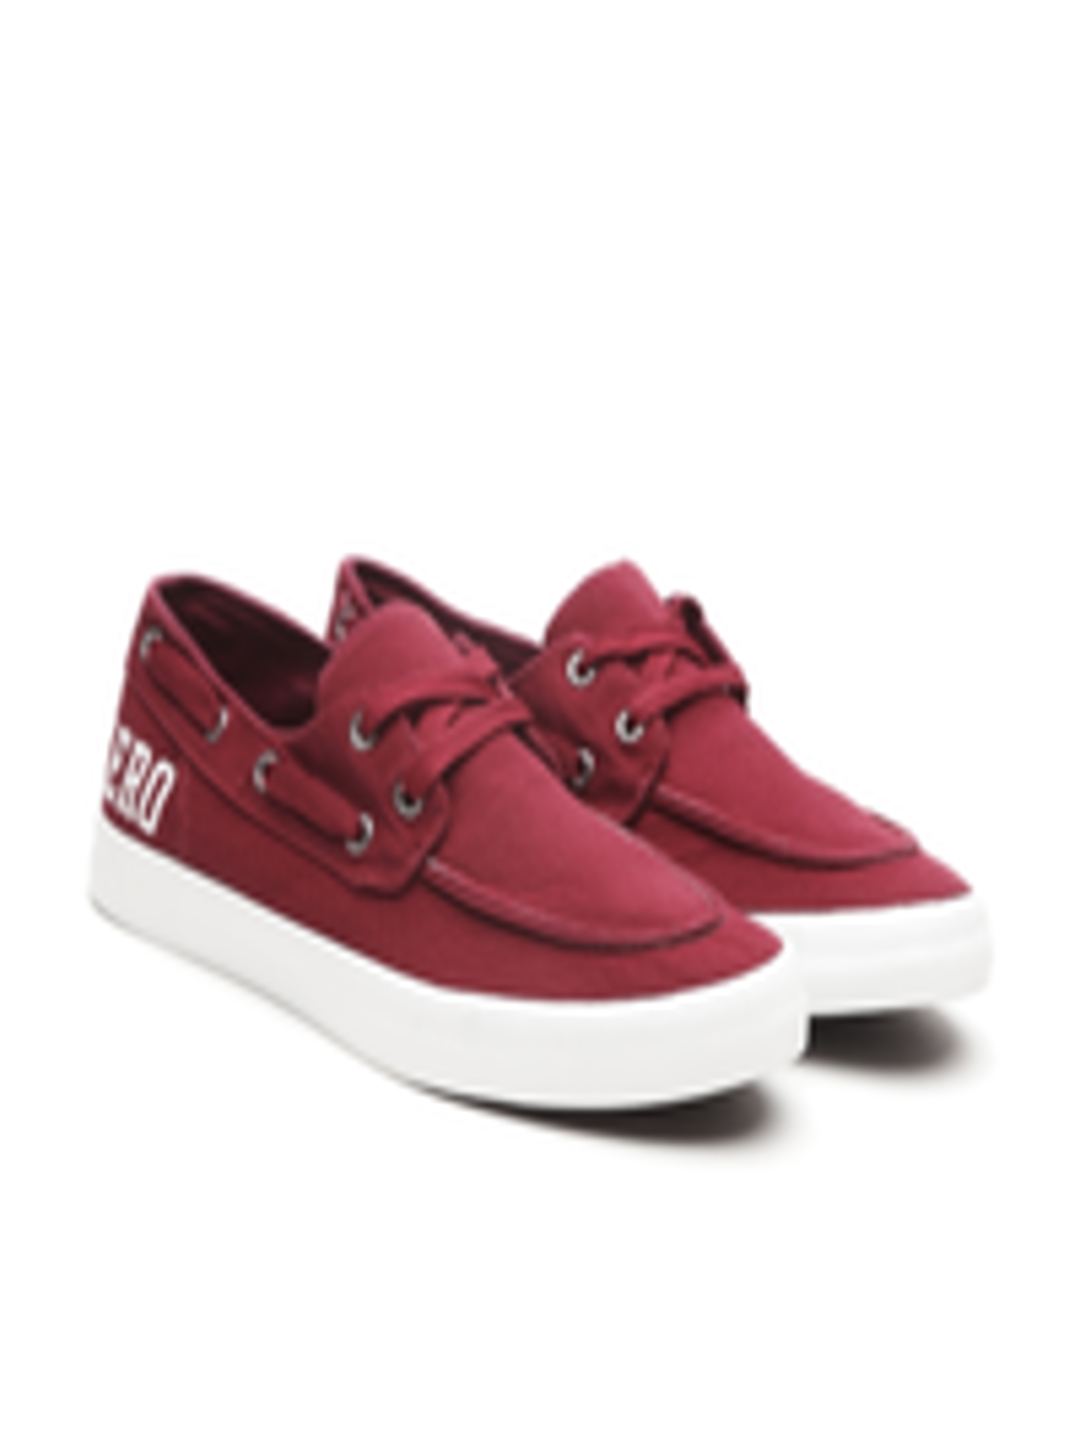 Buy Aeropostale Men Maroon Boat Shoes Casual Shoes for